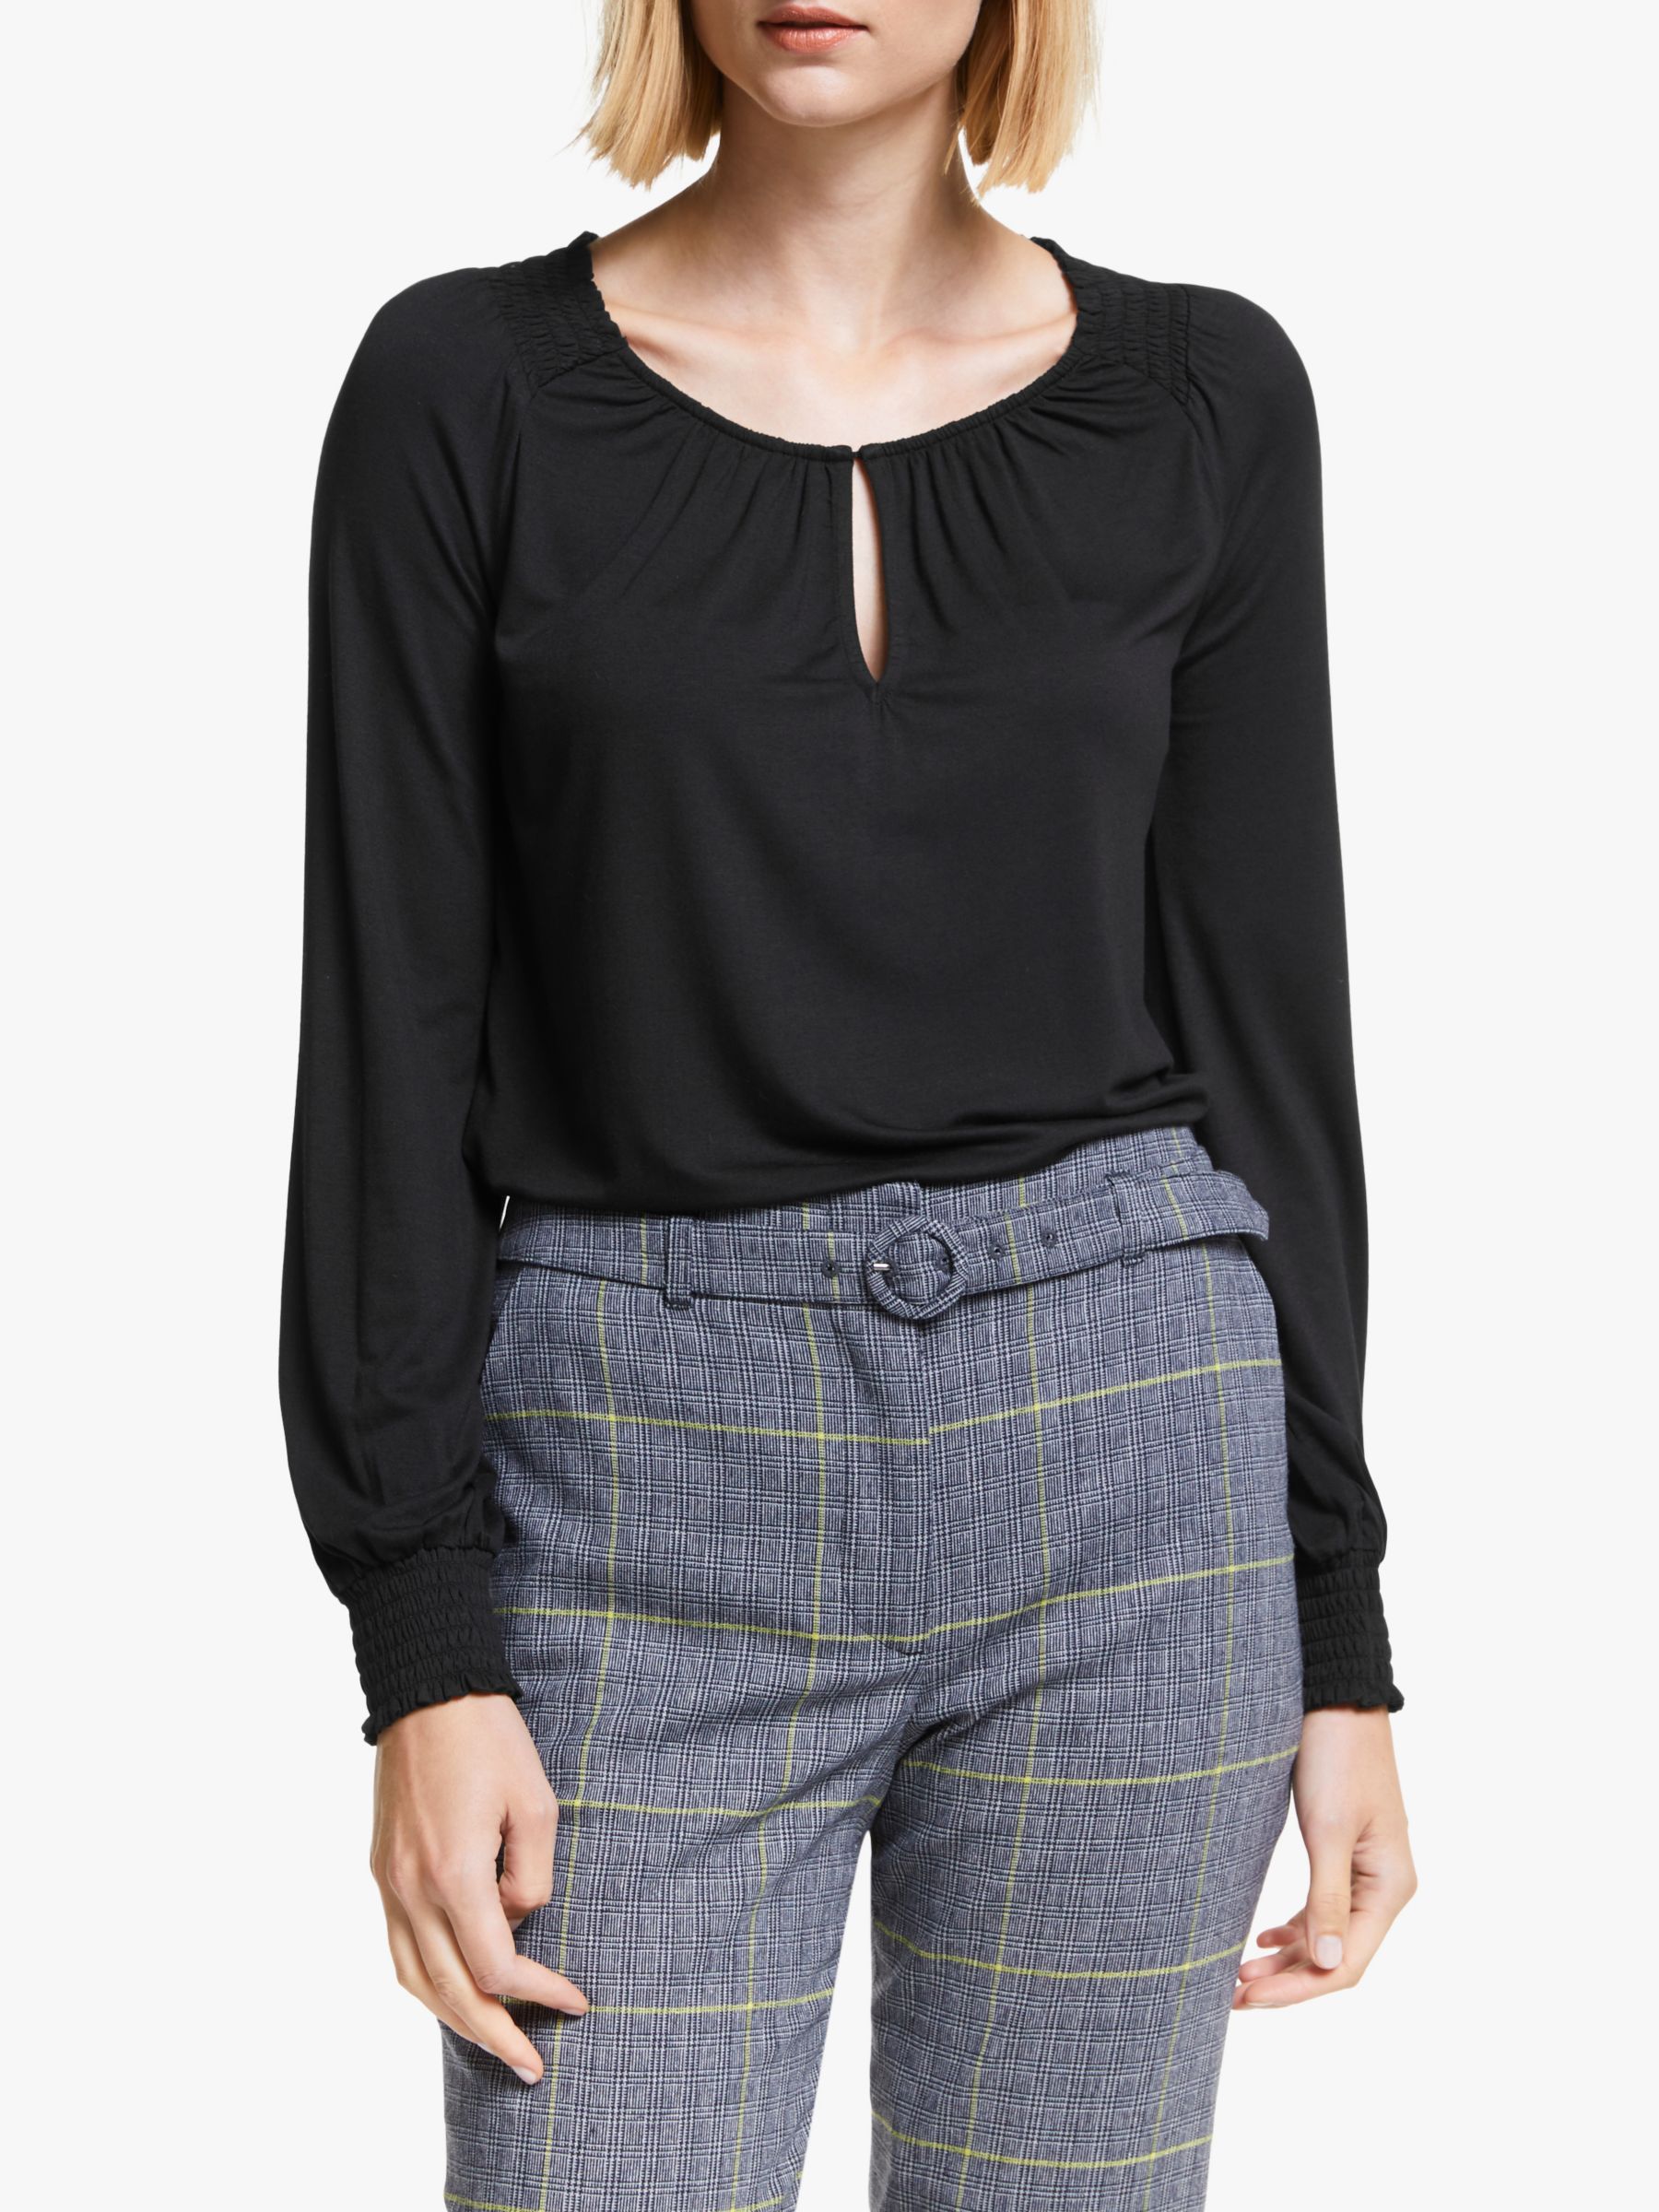 Boden Vicky Jersey Top at John Lewis 